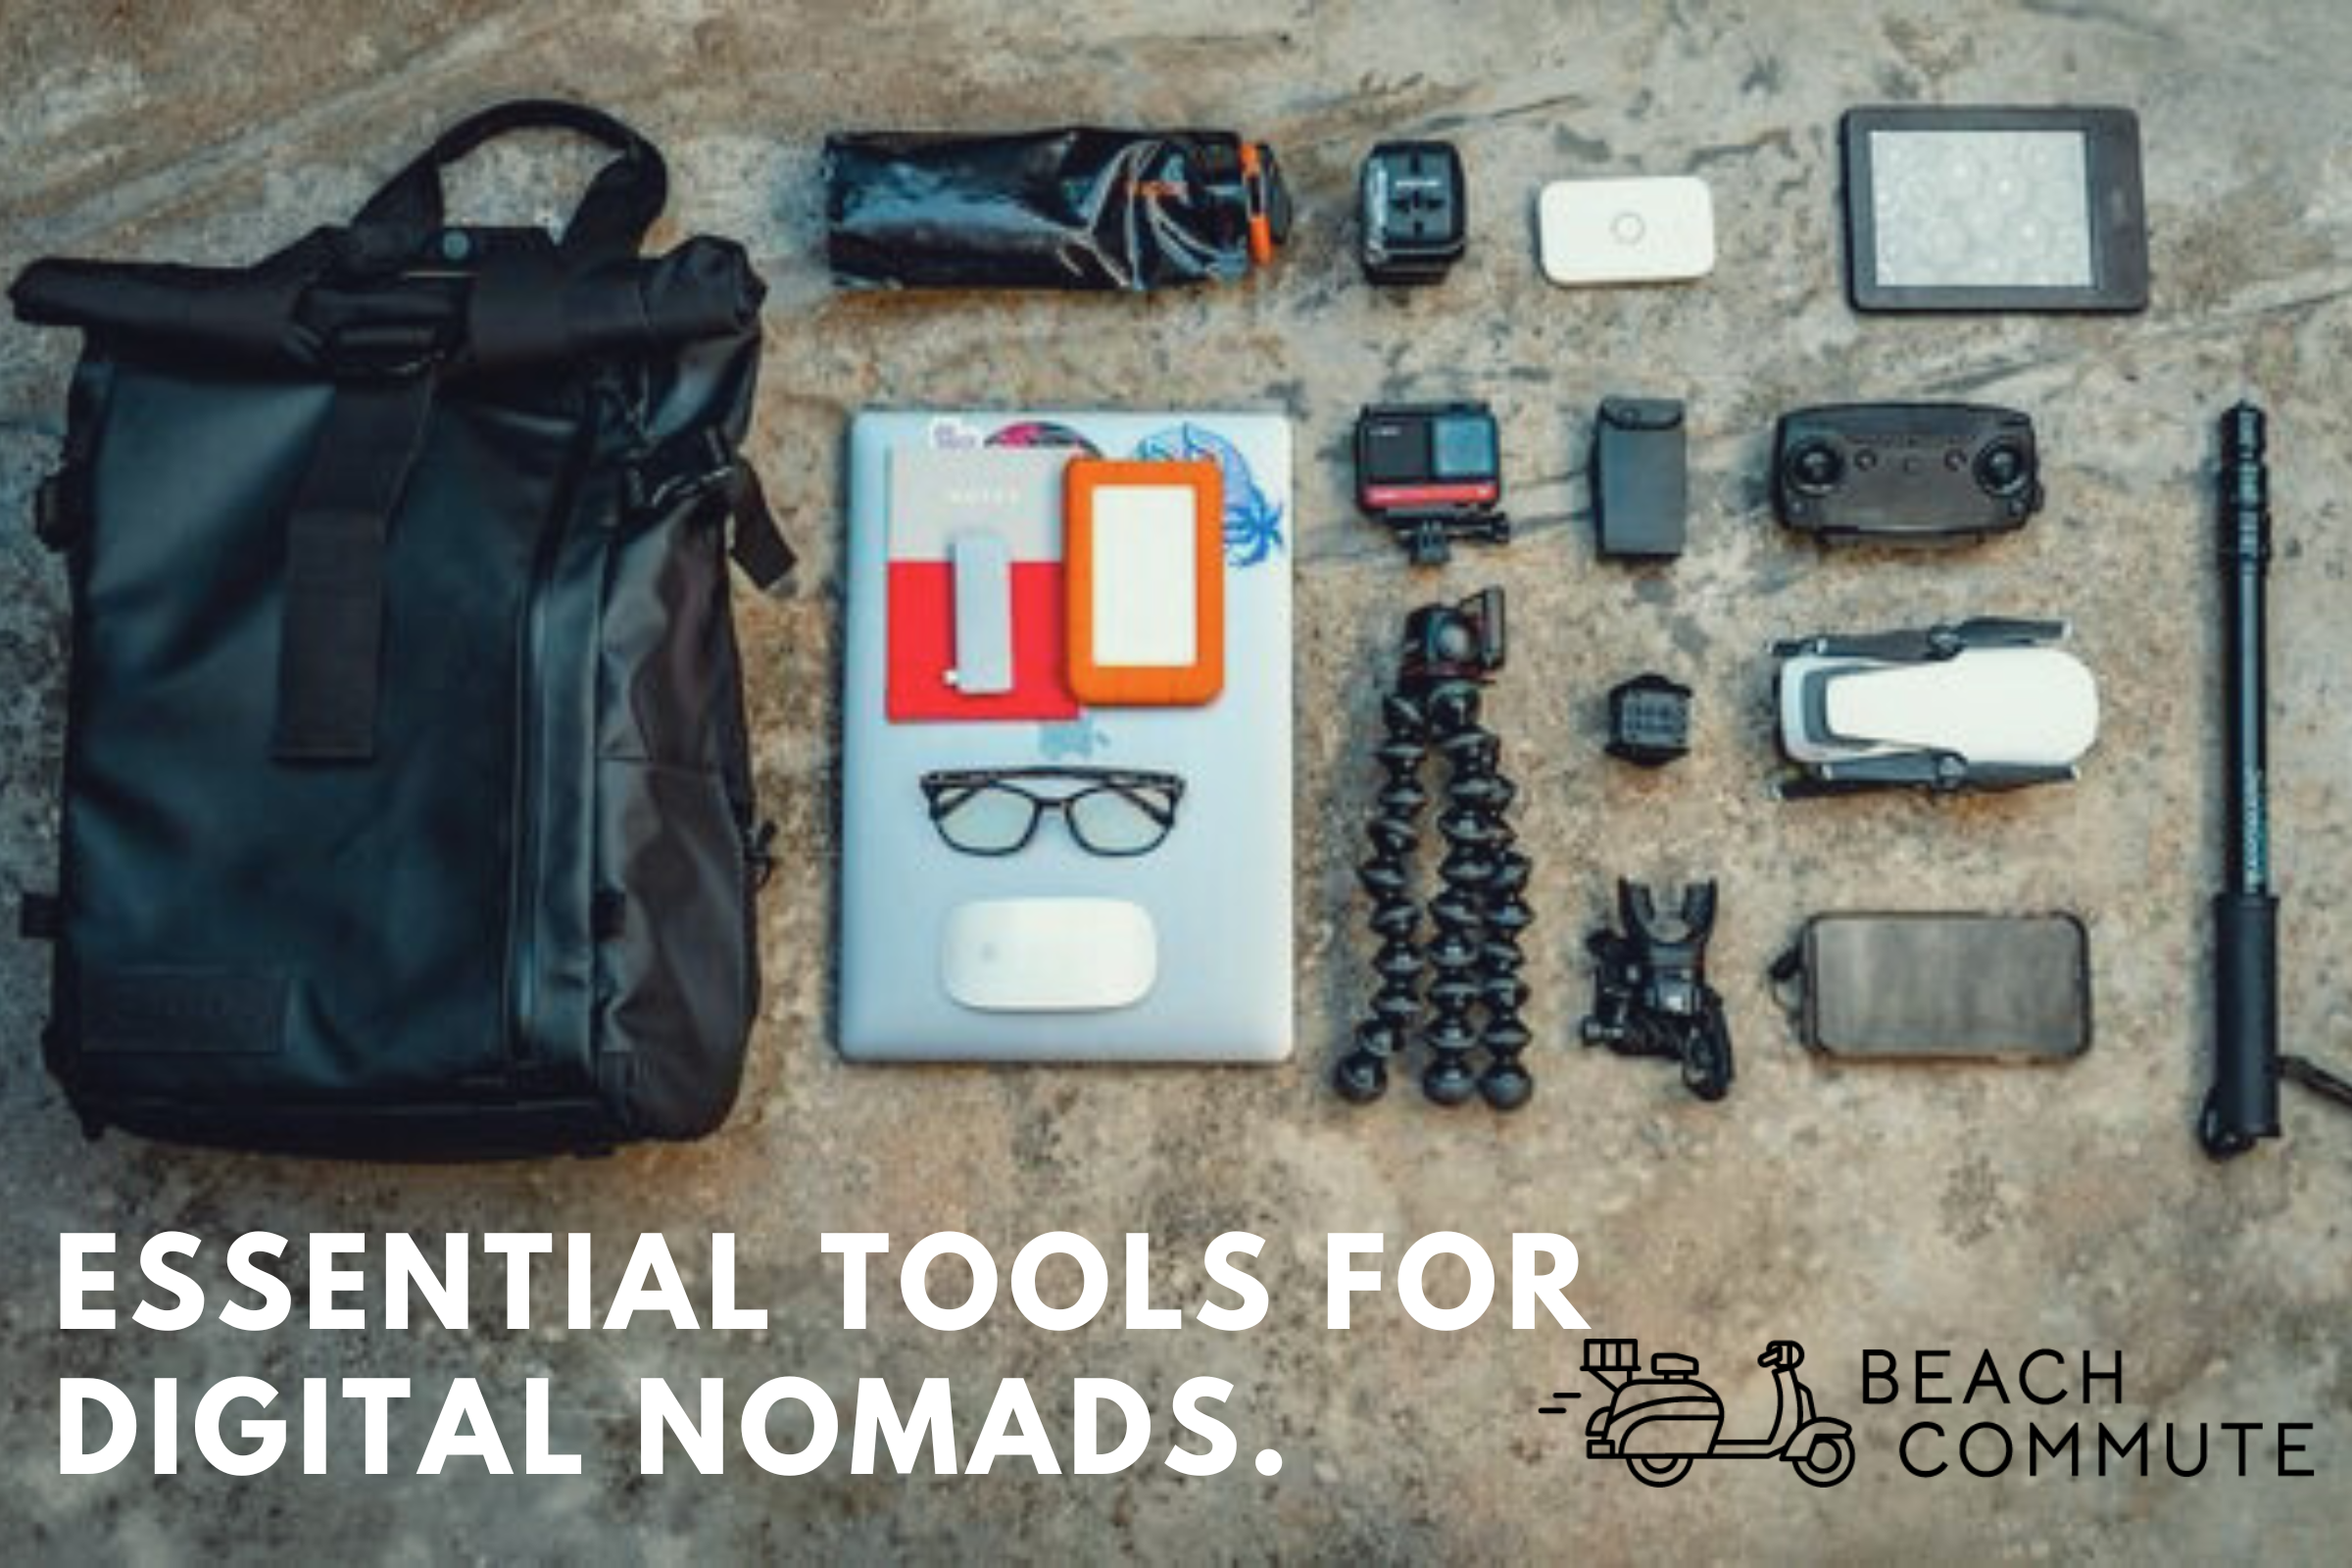 What Are the Essential Tools for Remote Work as a Digital Nomad?